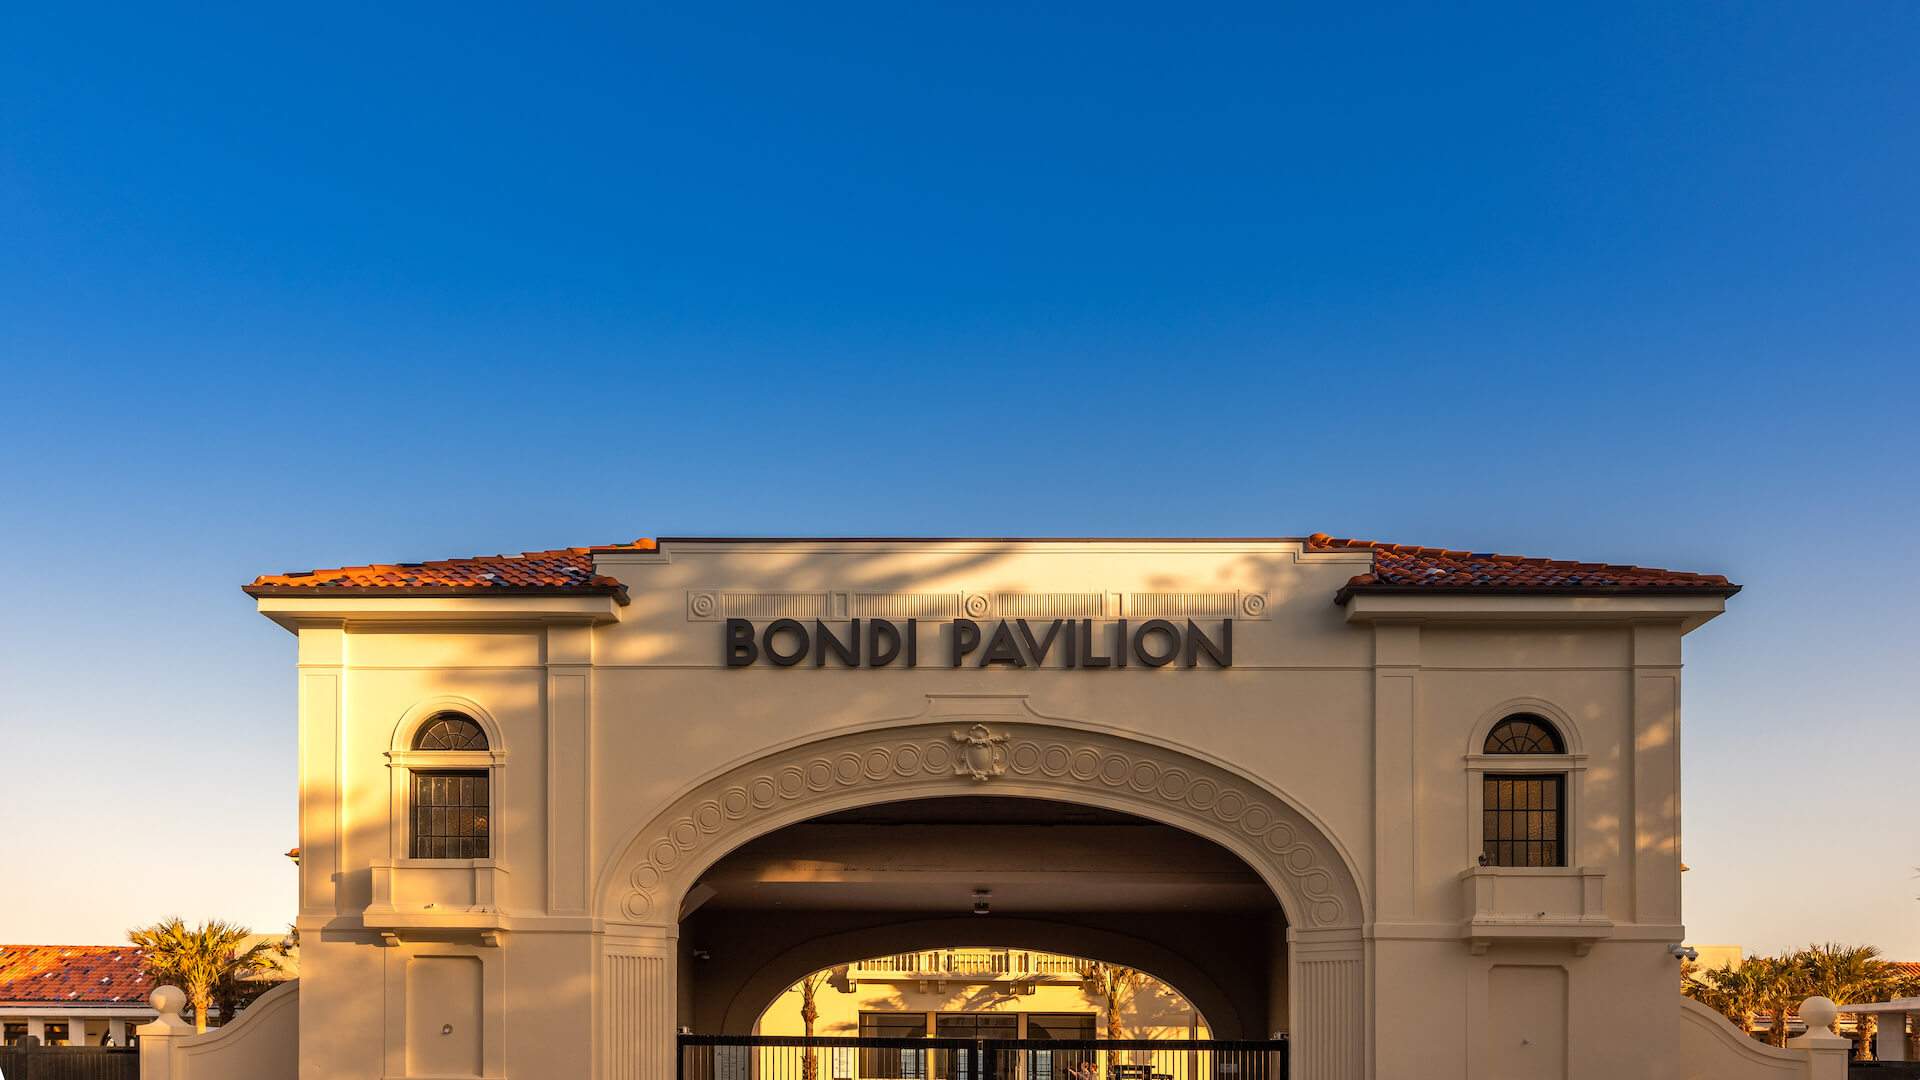 Meet the Makers Behind the New and Improved Bondi Pavilion